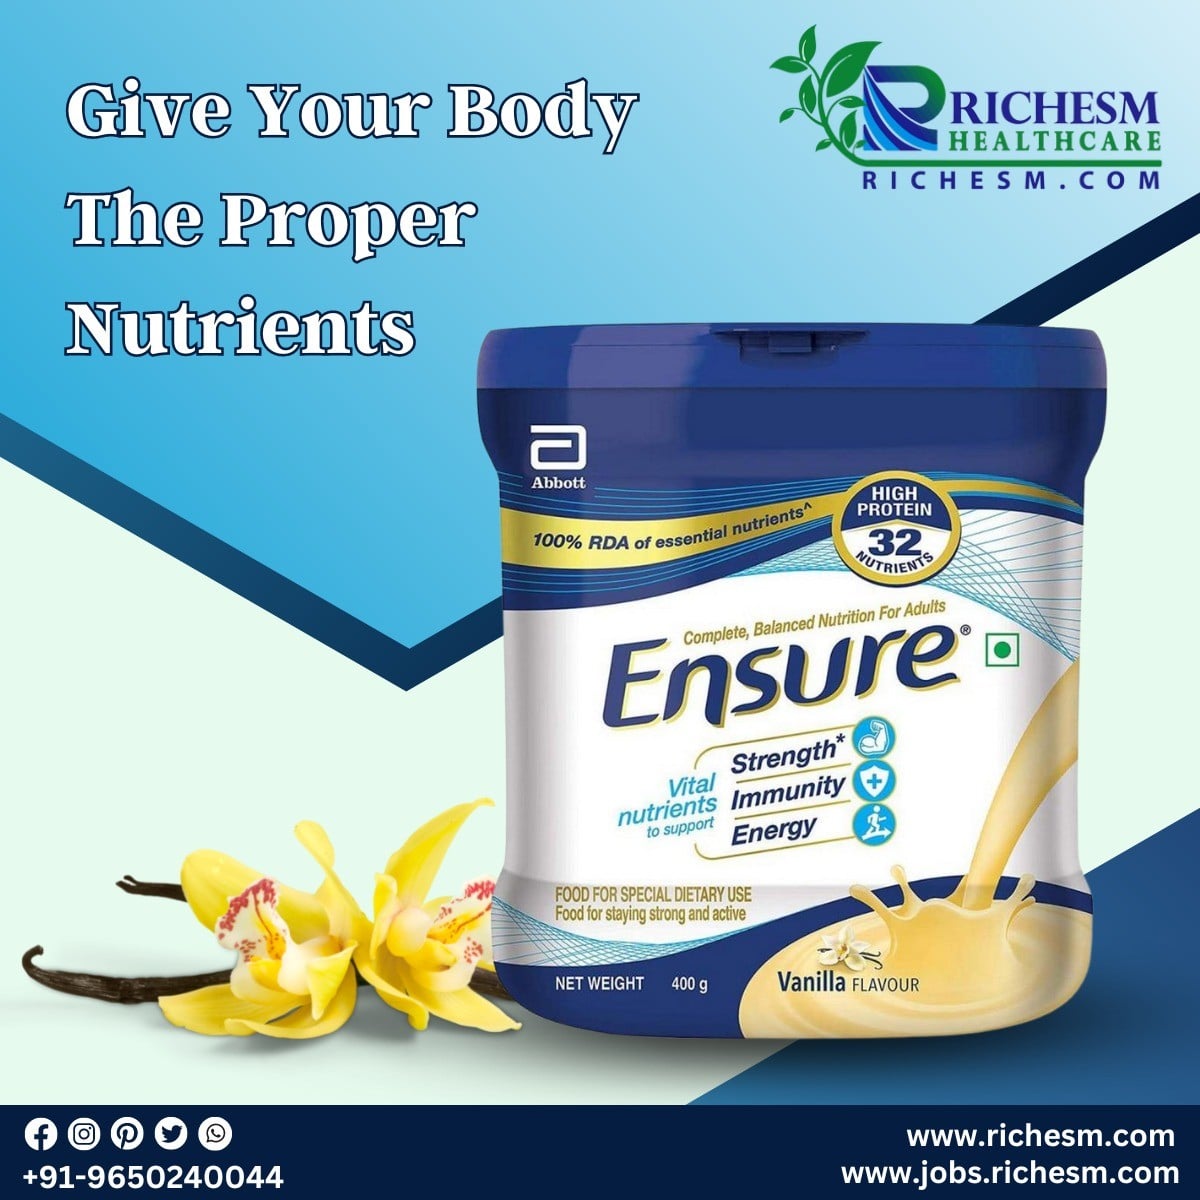 Ensure Complete Balanced Nutrition For Adults RichesM